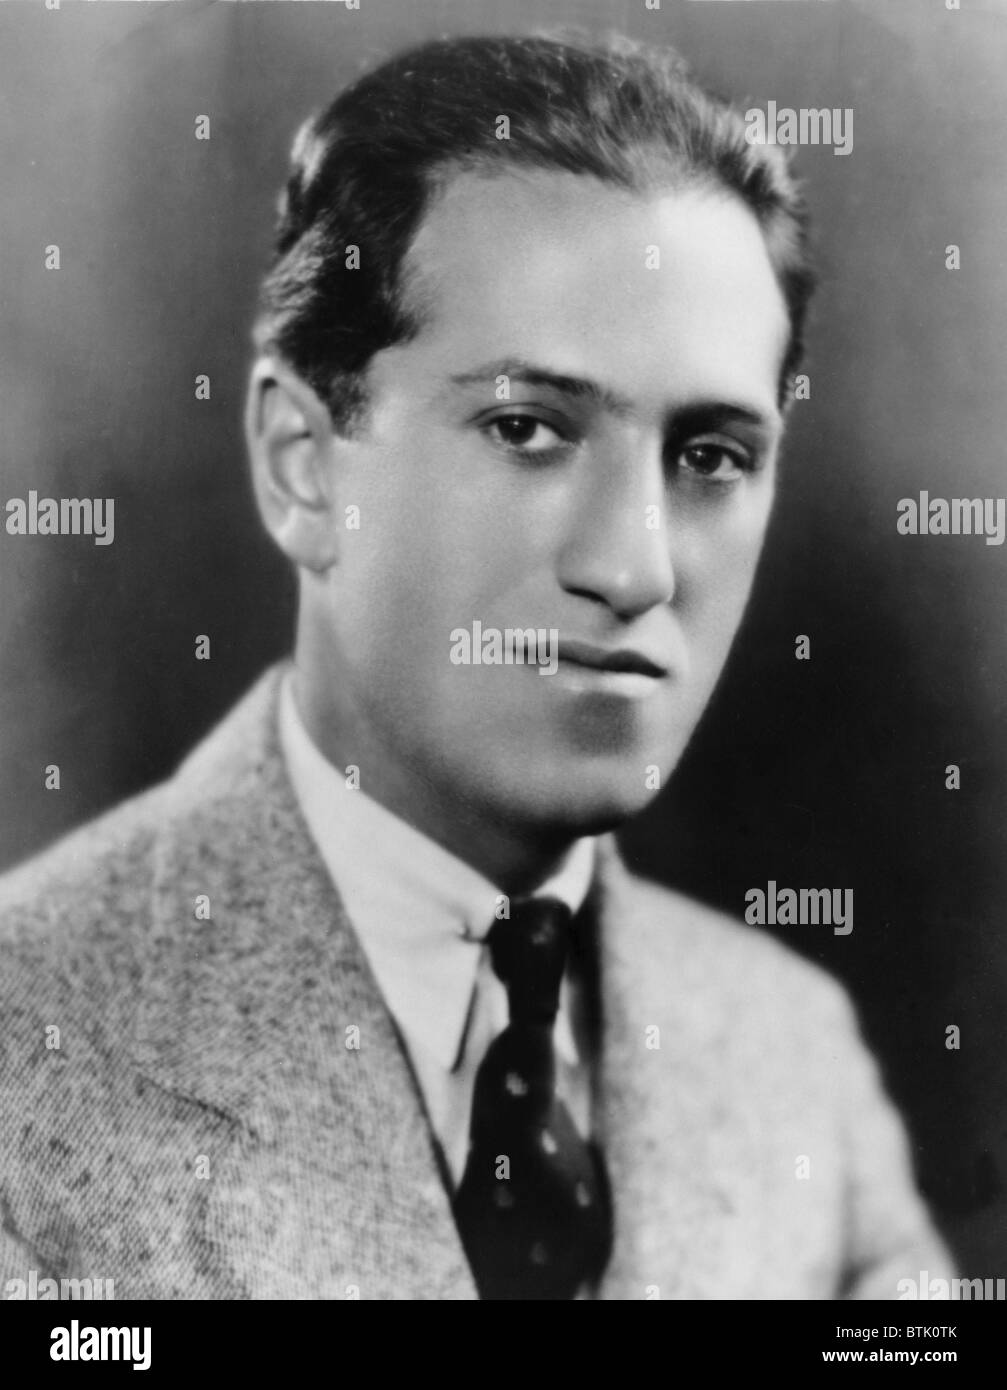 George Gershwin (1898-1937) American composer for musical theater and symphony orchestra. 1930. Stock Photo